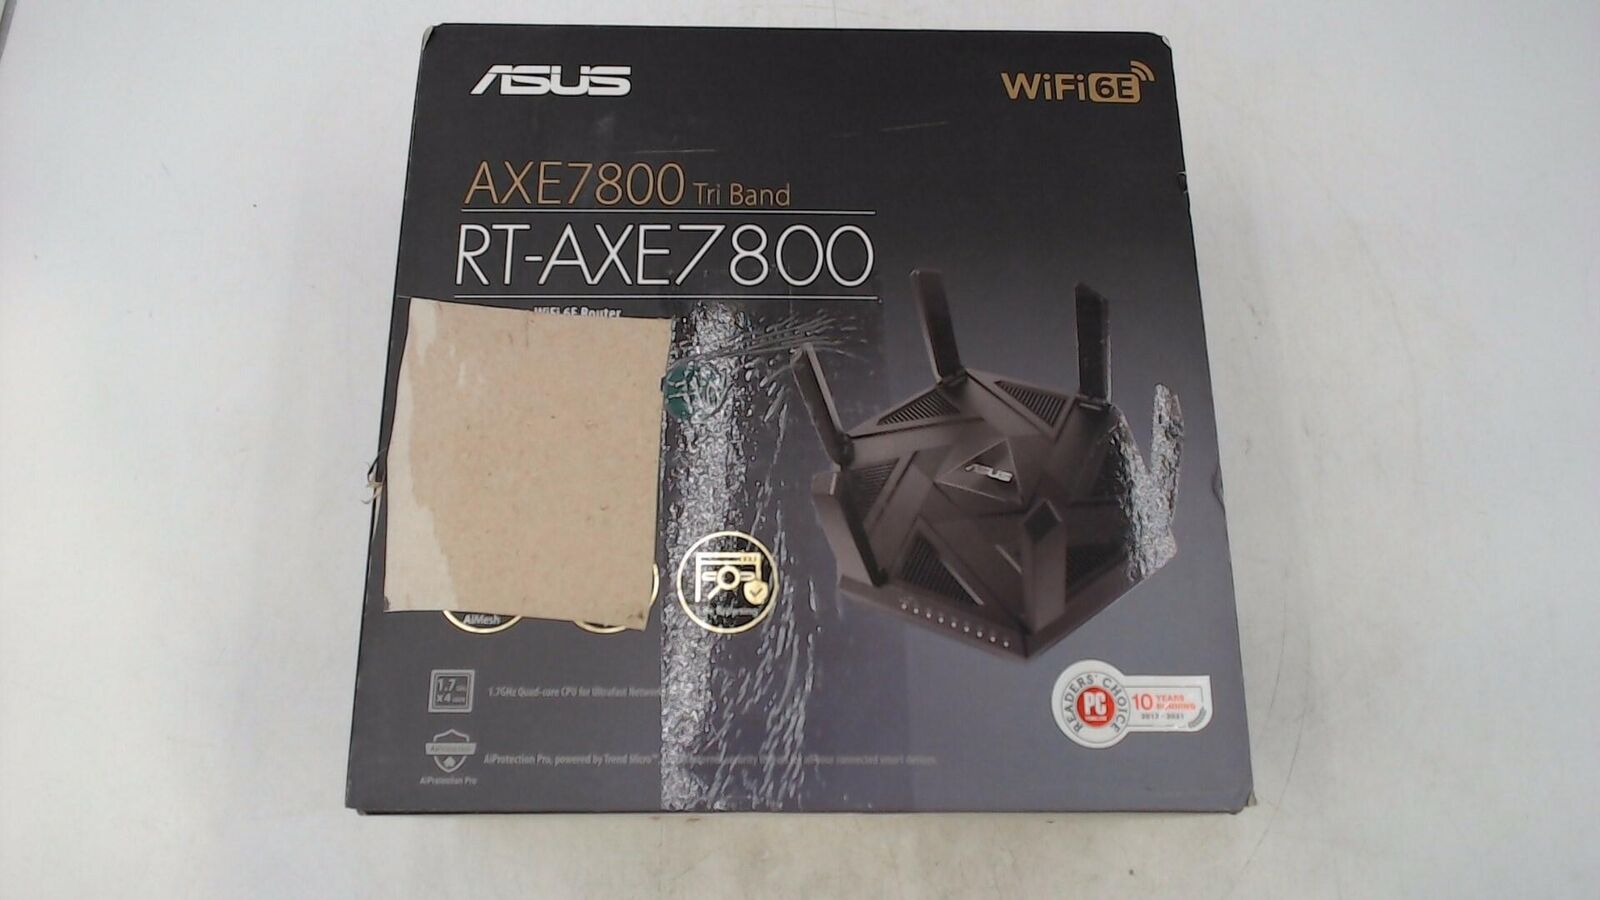 ASUS RT-AXE7800 Tri-band WiFi 6E (802.11ax) Router, 6GHz Band